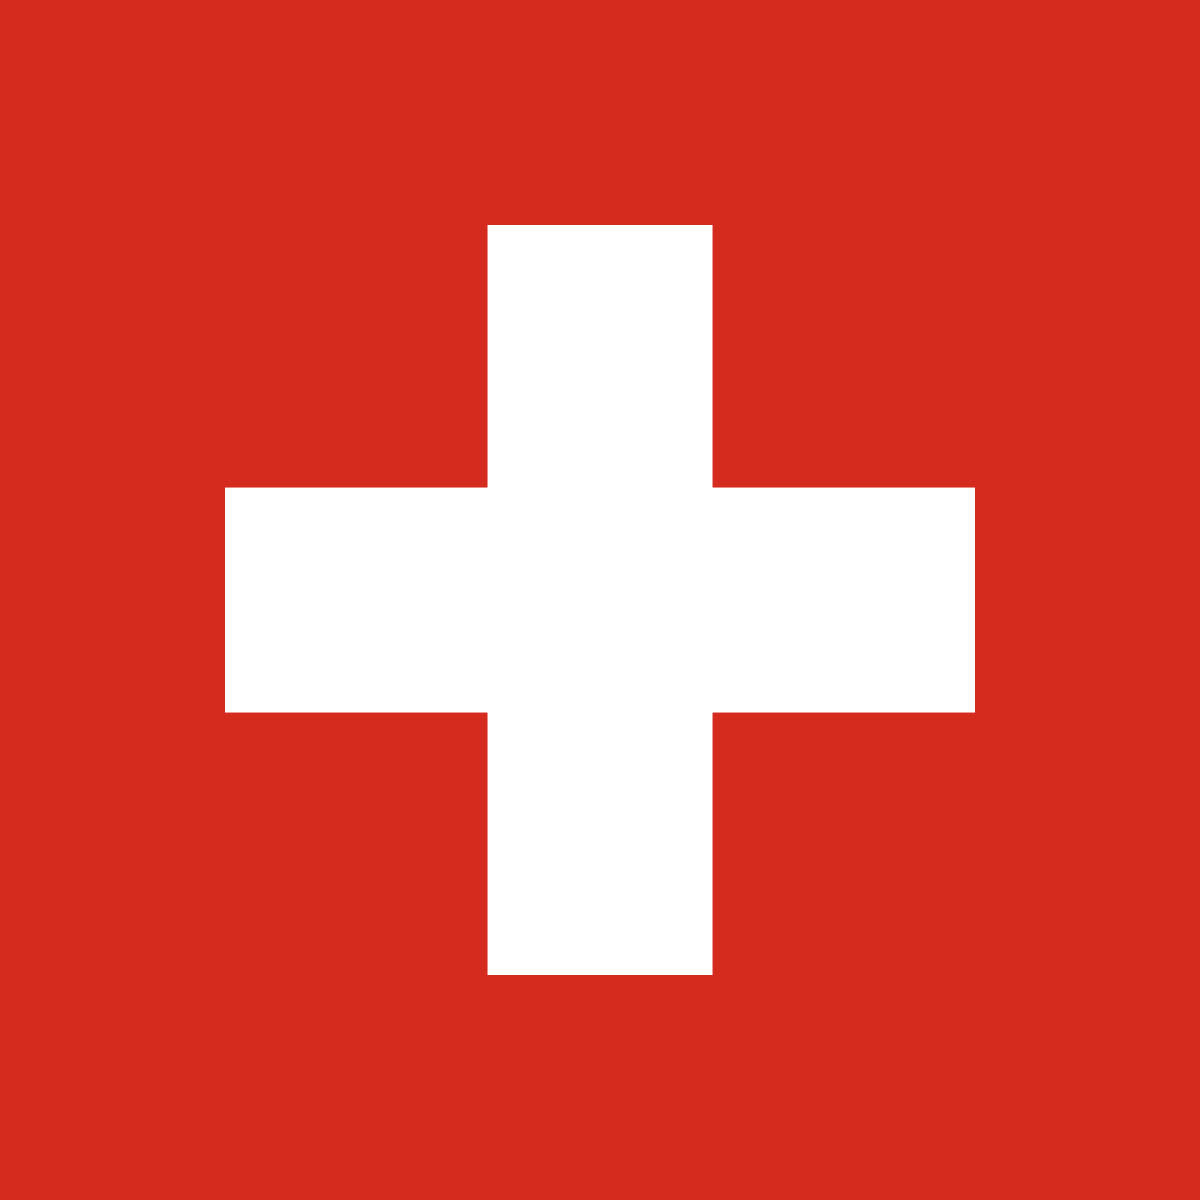 Flame On Red Rectangle Logo - Flag of Switzerland